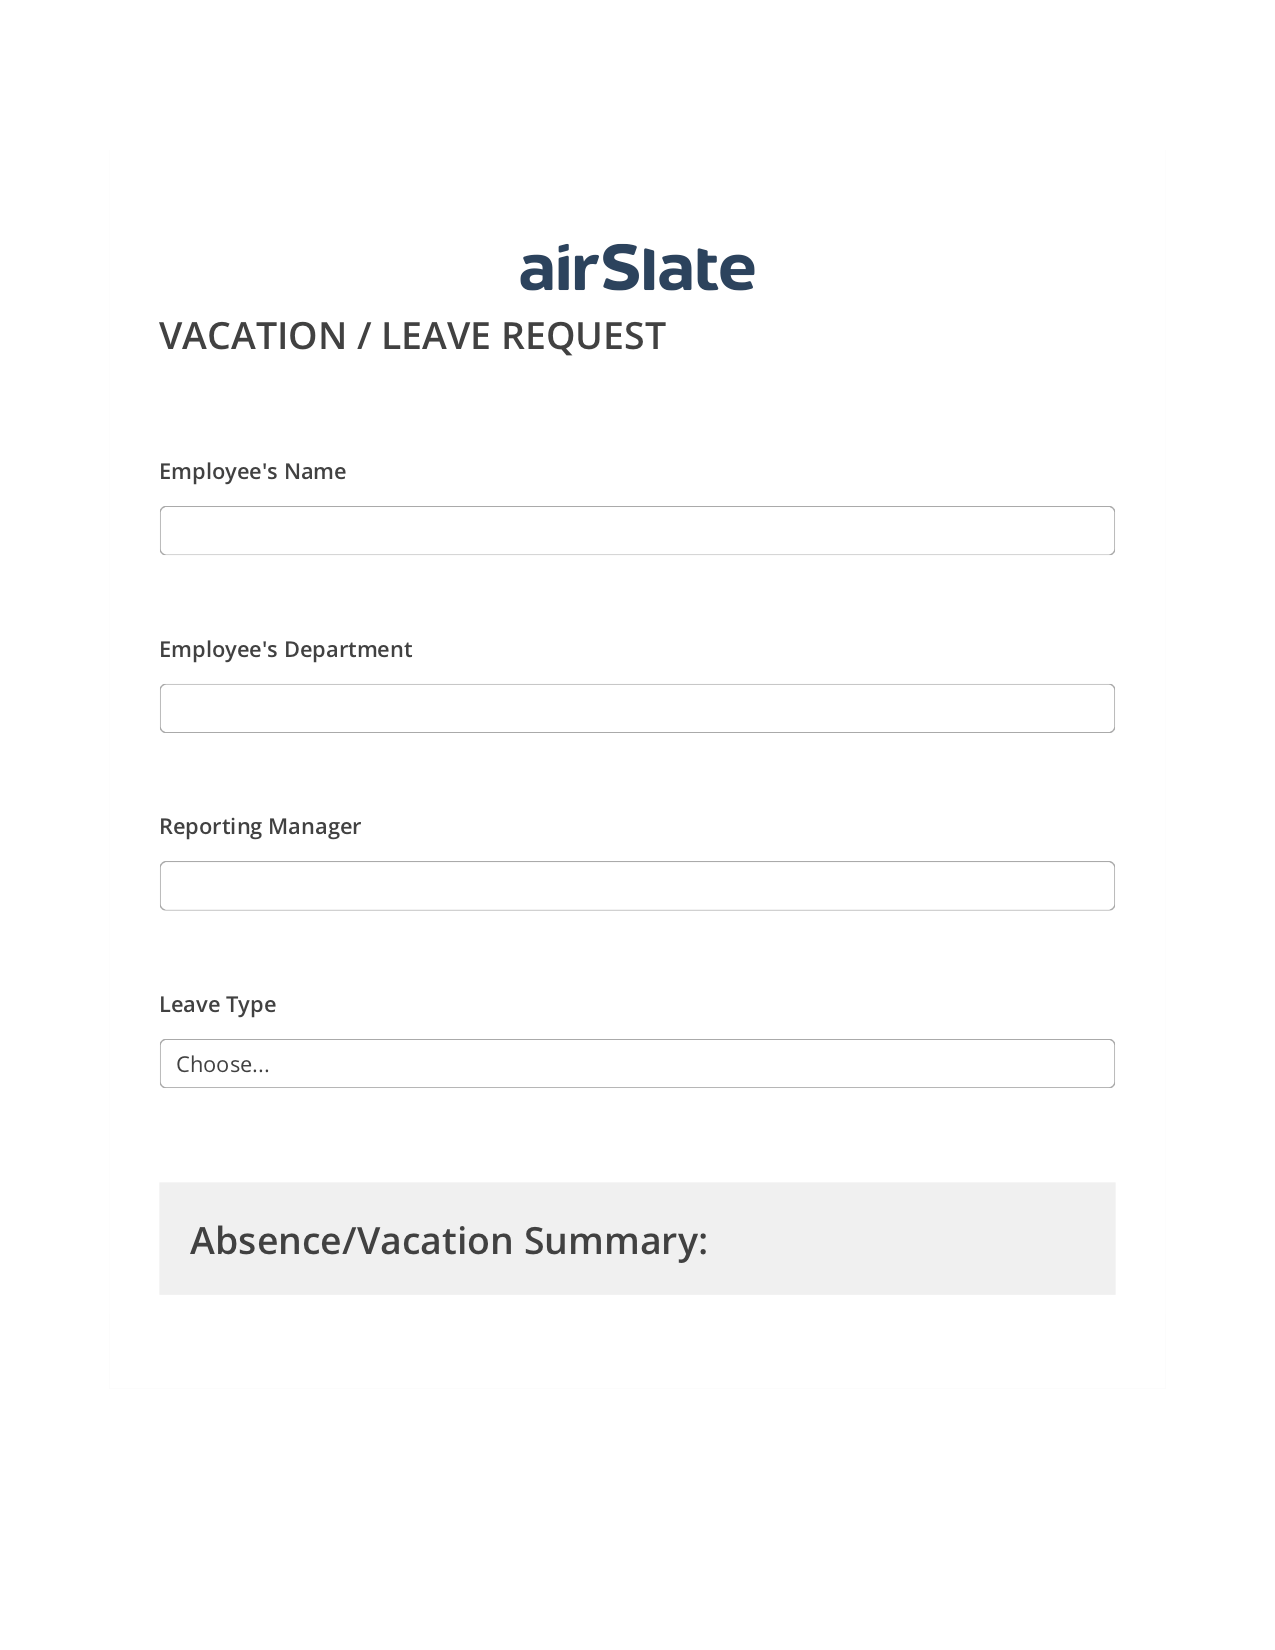 Multirole Vacation/Leave Request Workflow Pre-fill Dropdowns from Airtable, Rename Slate Bot, Export to Salesforce Record Bot